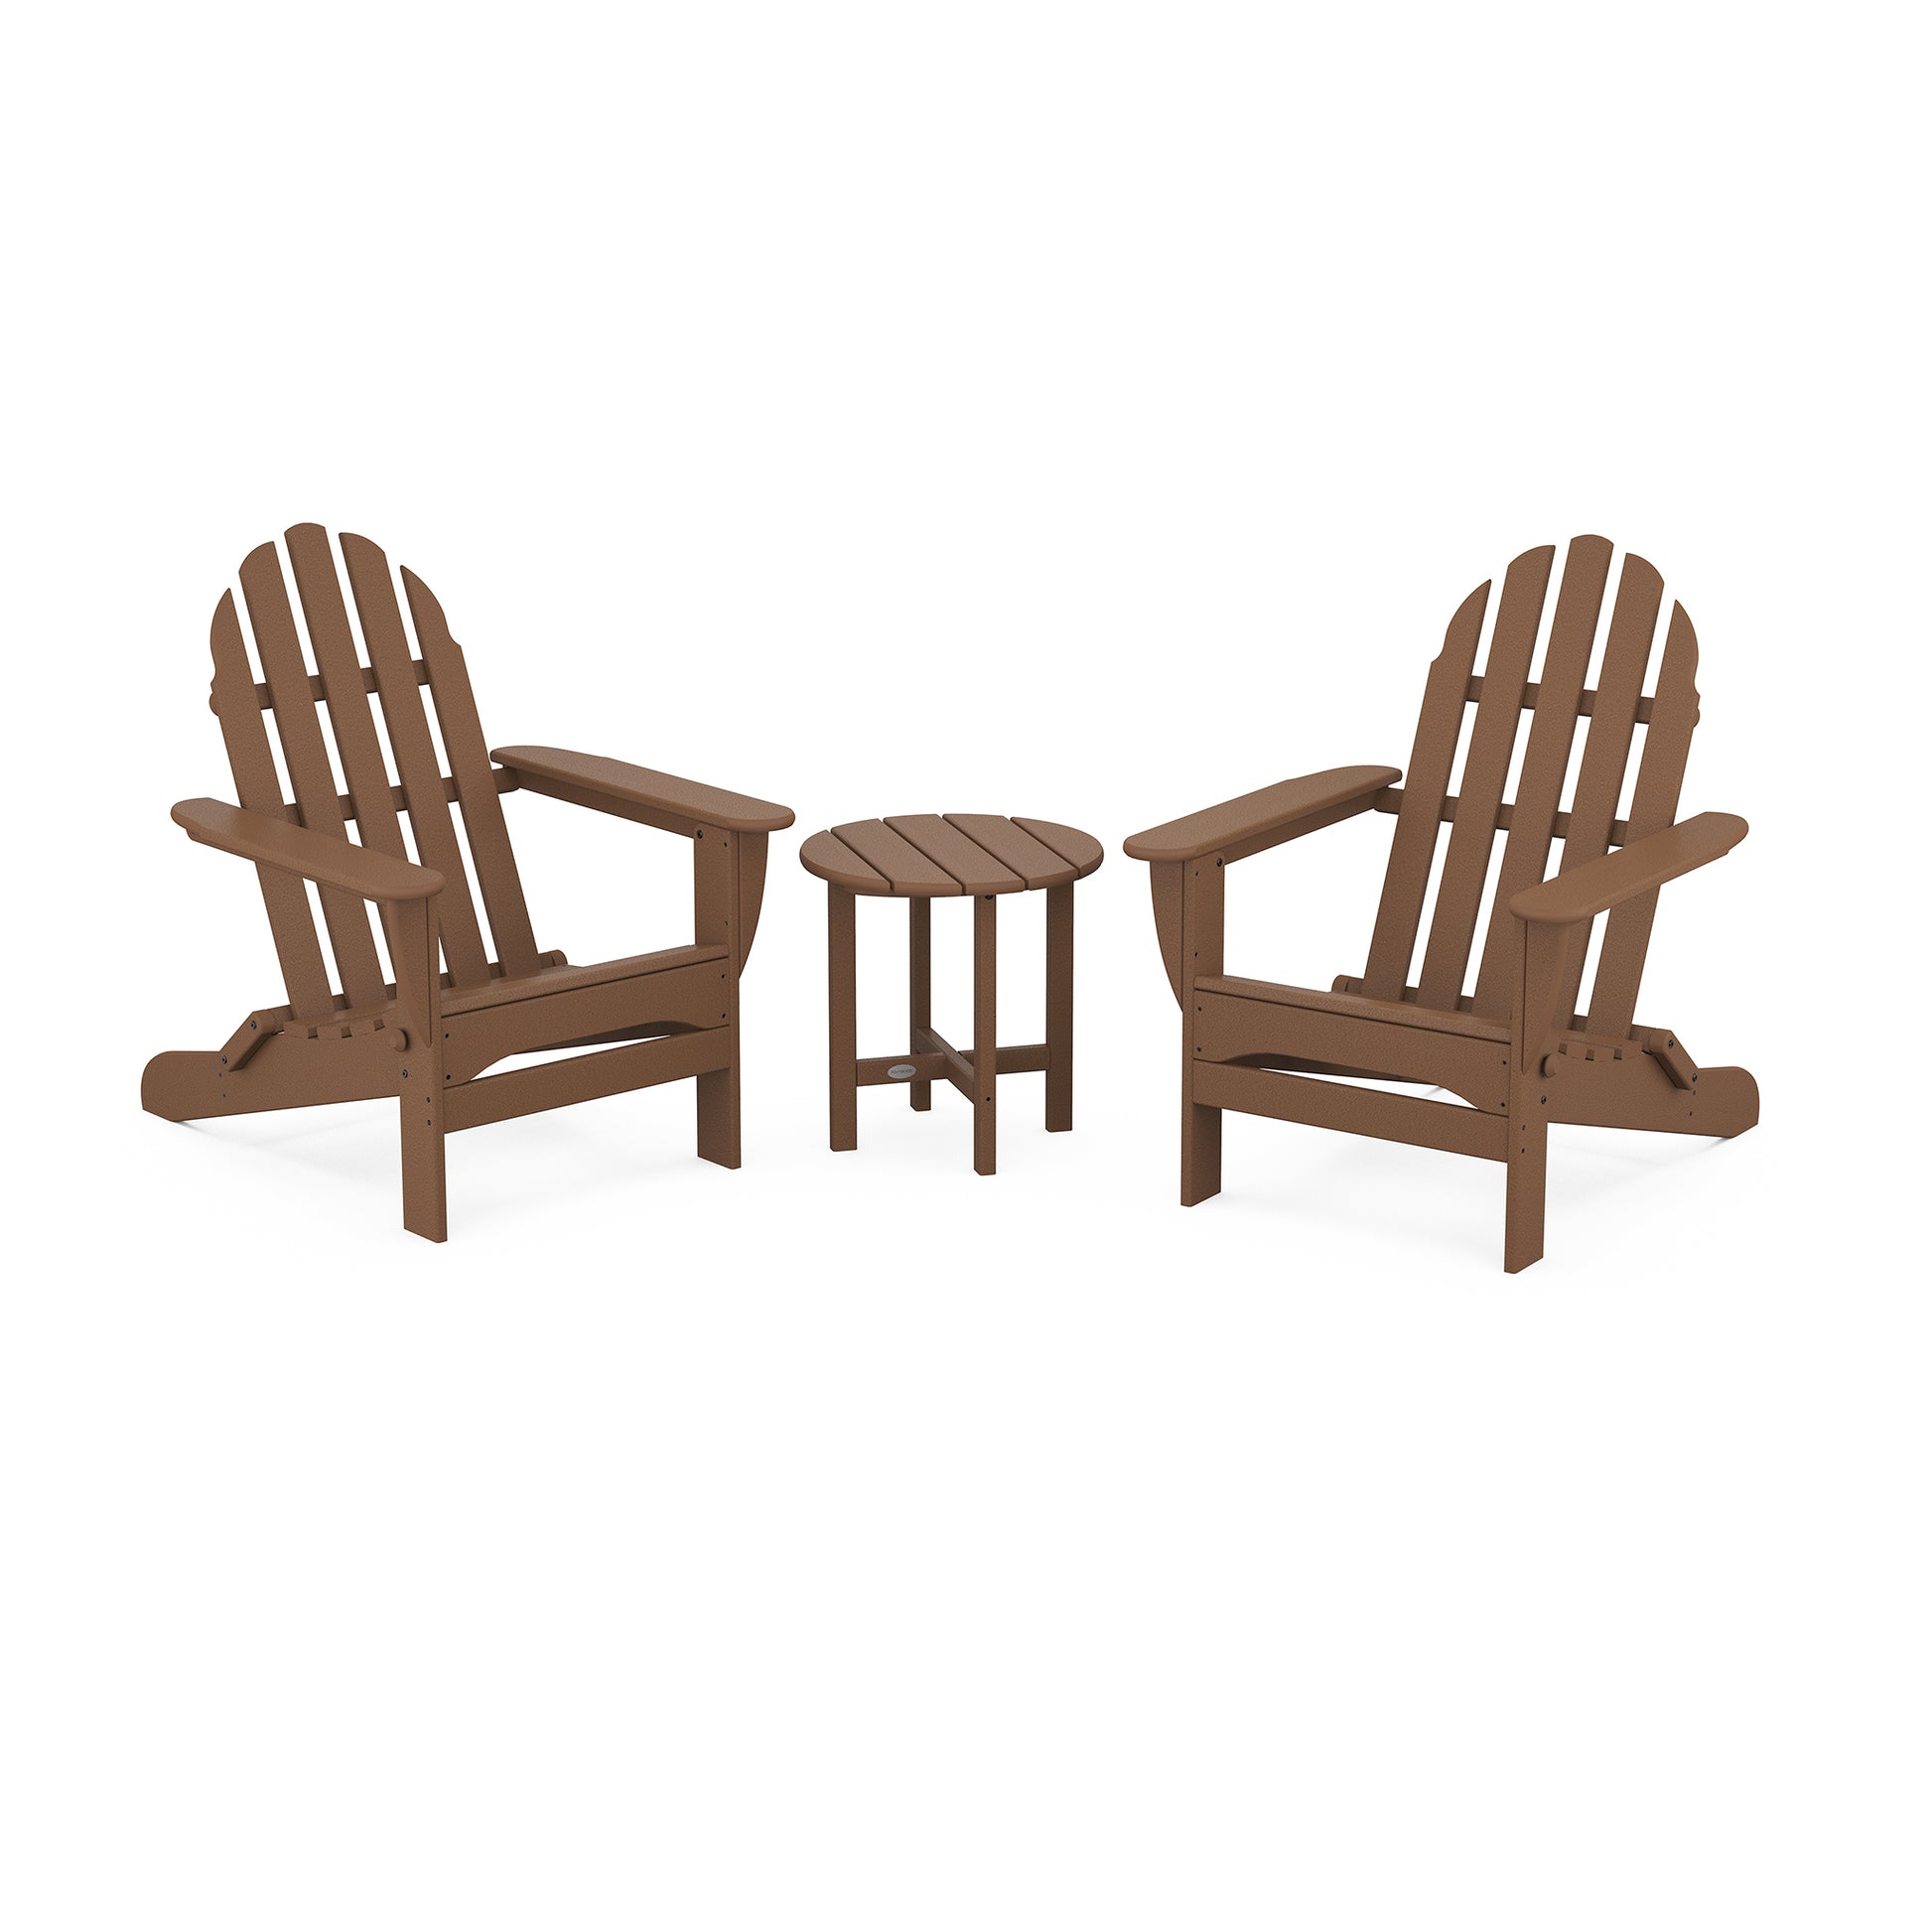 Two brown POLYWOOD® Classic Folding Adirondack 3-Piece Sets with a small round table between them, isolated on a white background. The chairs feature a classic slatted design.